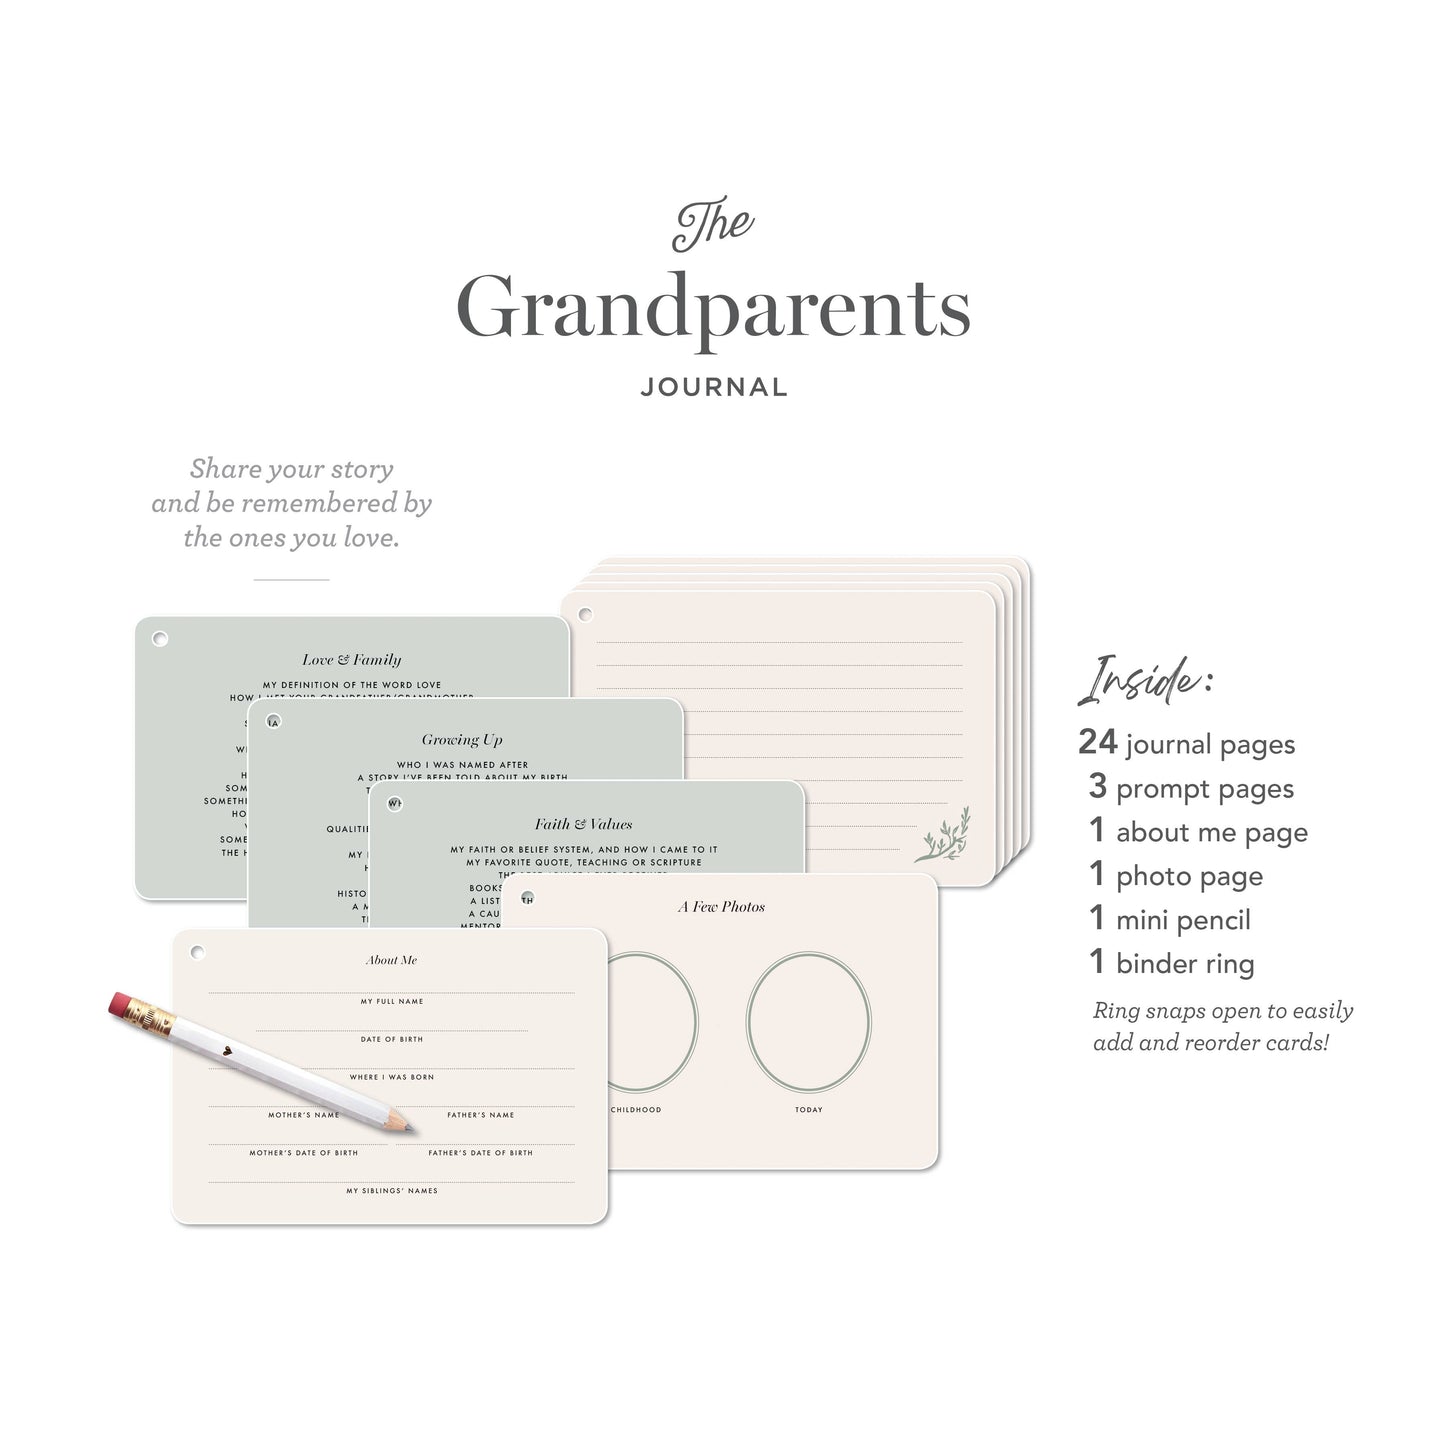 The Grandparents Journal